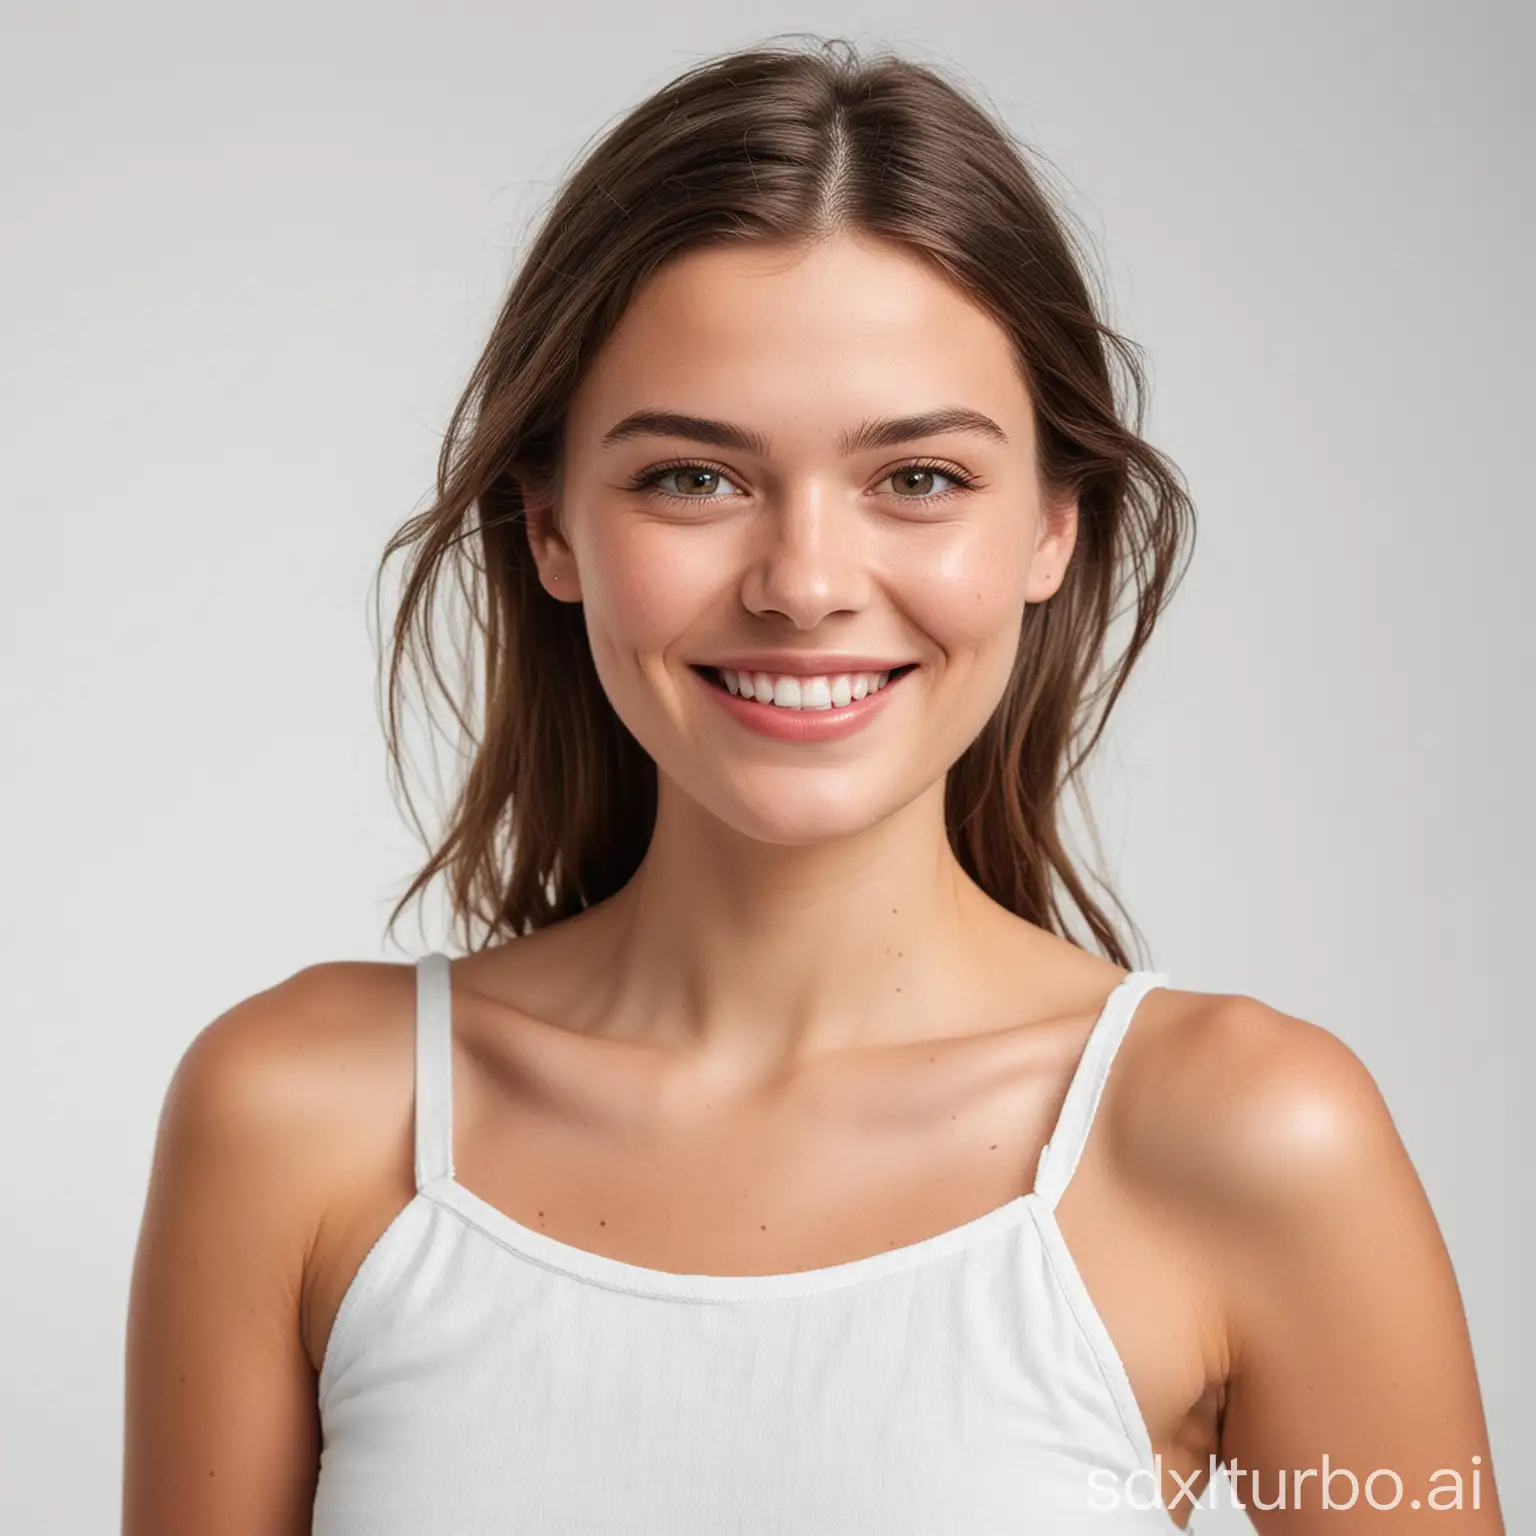 A model standing in front of a white background. The model is looking at the camera and smiling.